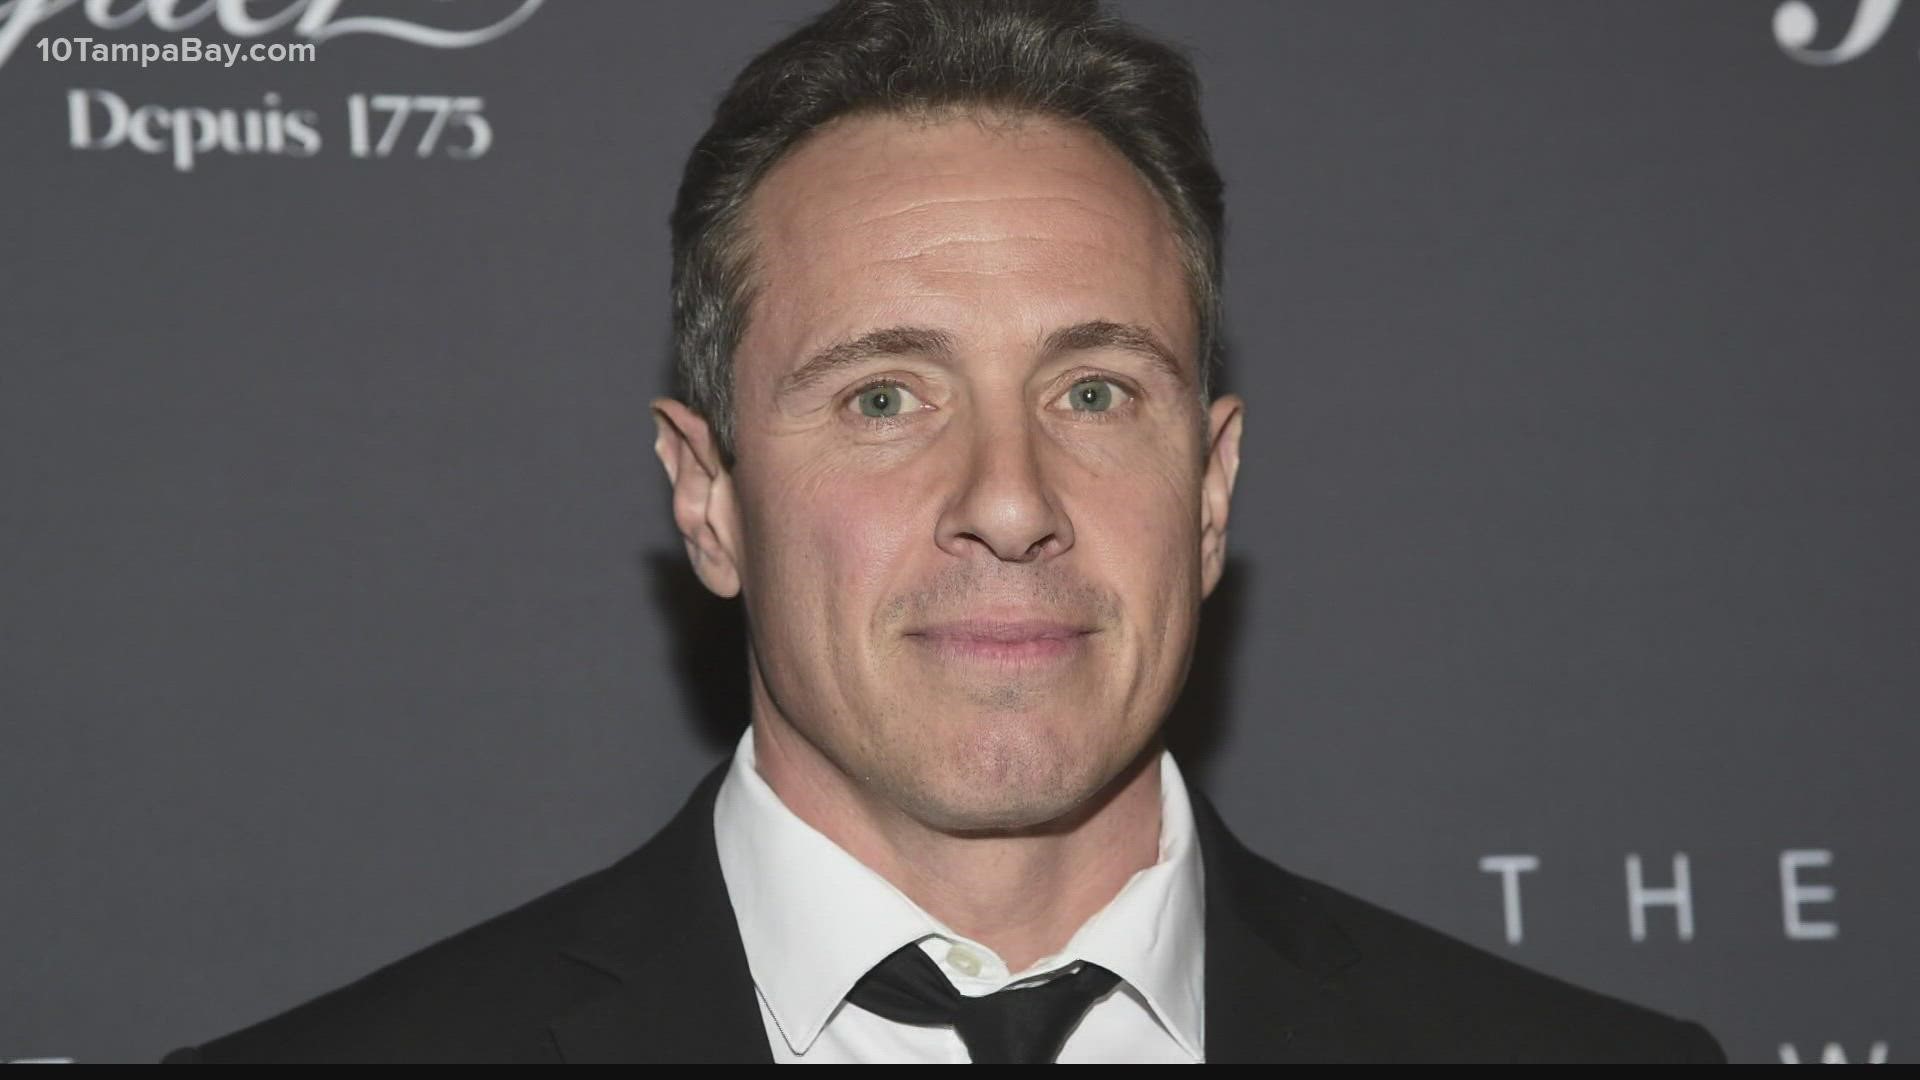 Investigation documents indicate Chris Cuomo pressed sources for information on those accusing his brother, the former New York governor, of sexual harassment.